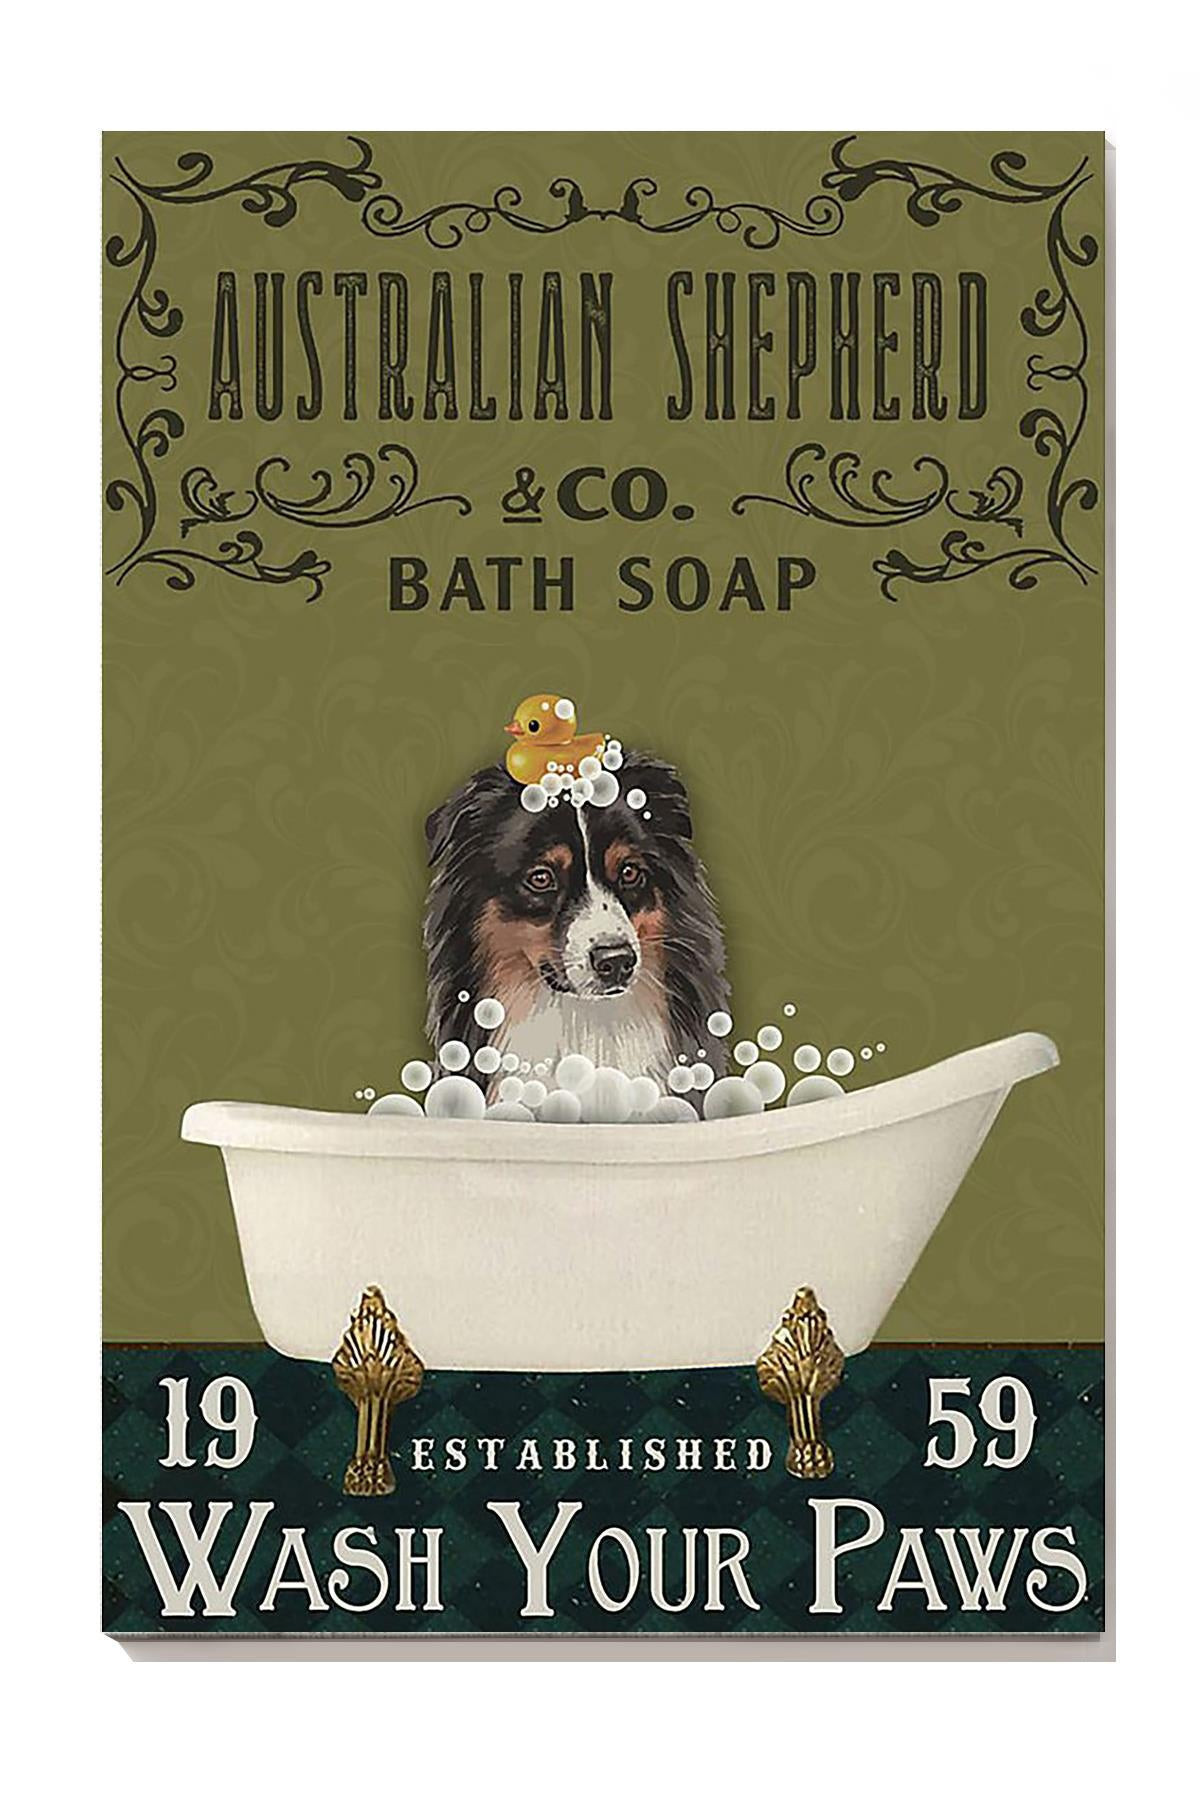 Australian Shepherd Bath Soap Wash Your Paws For Dog Owner Bathroom Decor1 Canvas Gallery Painting Wrapped Canvas Framed Prints, Canvas Paintings Wrapped Canvas 8x10